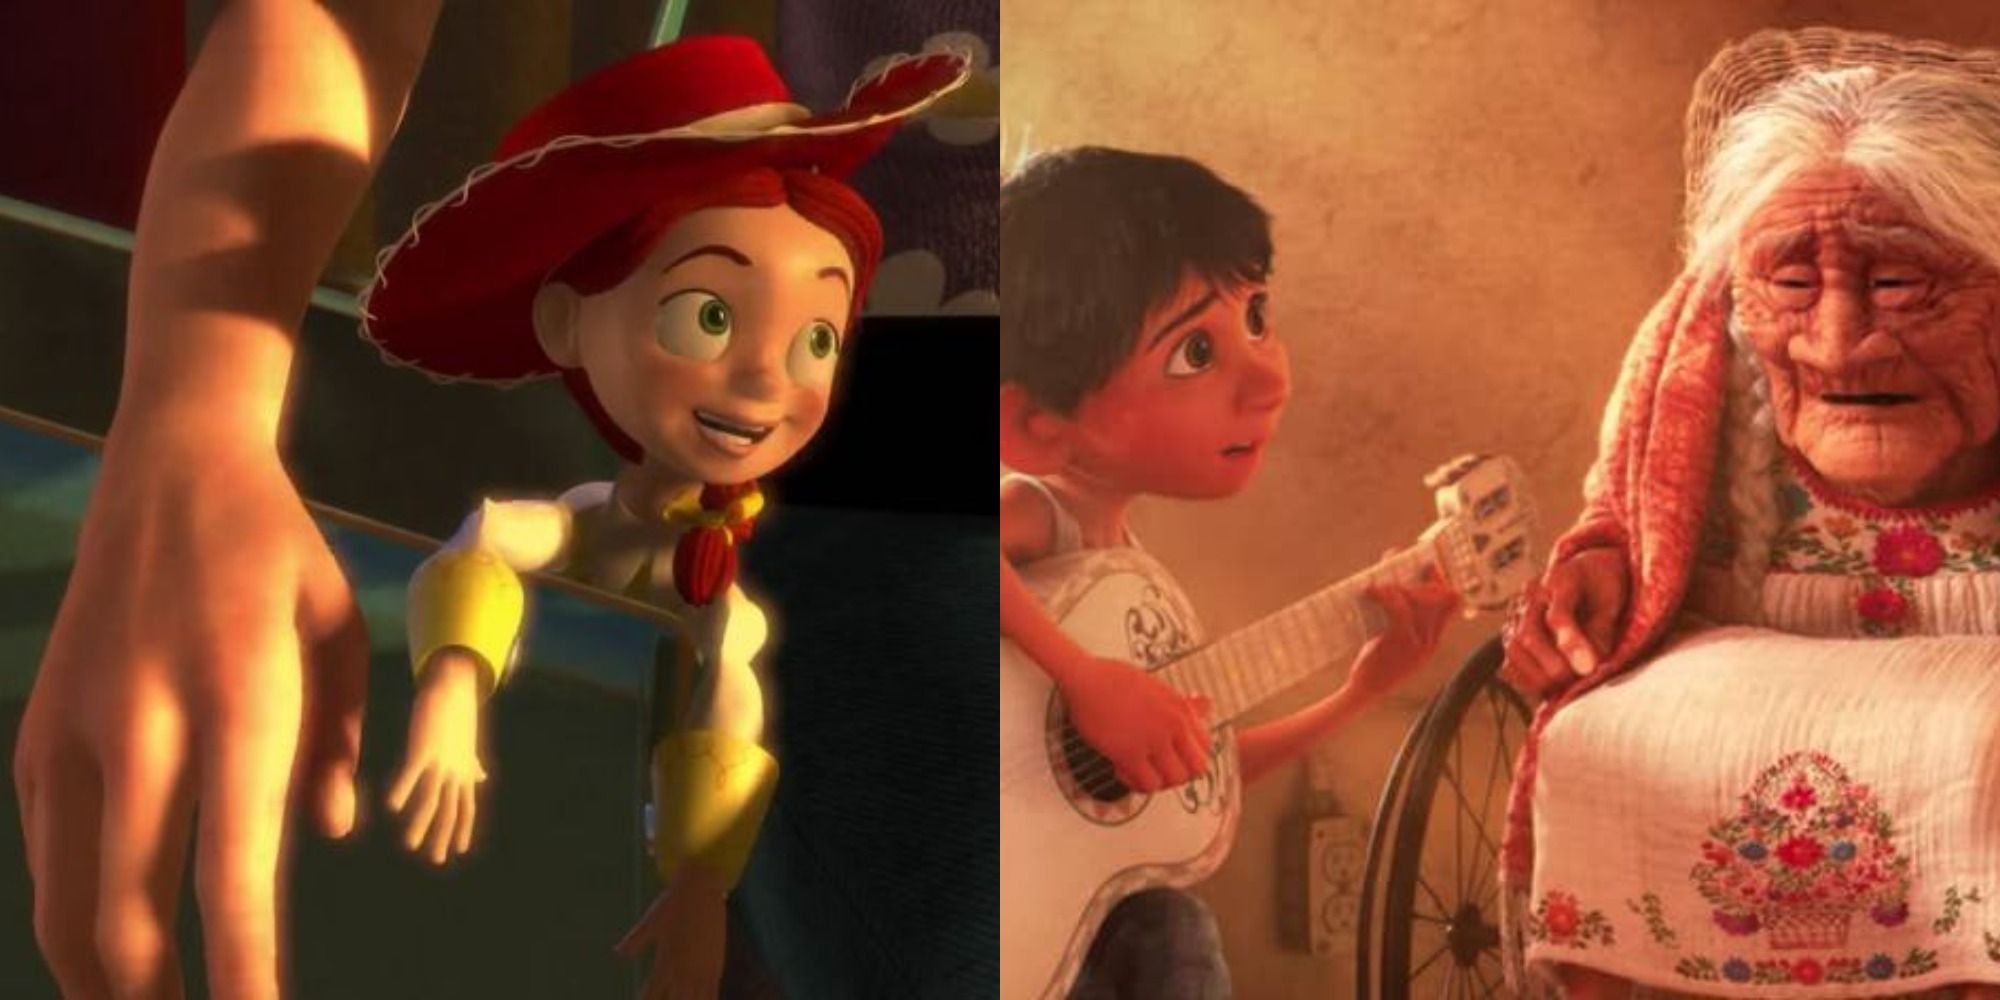 Split image showing Jessie in Toy Story 2 and Miguel and Coco in Coco